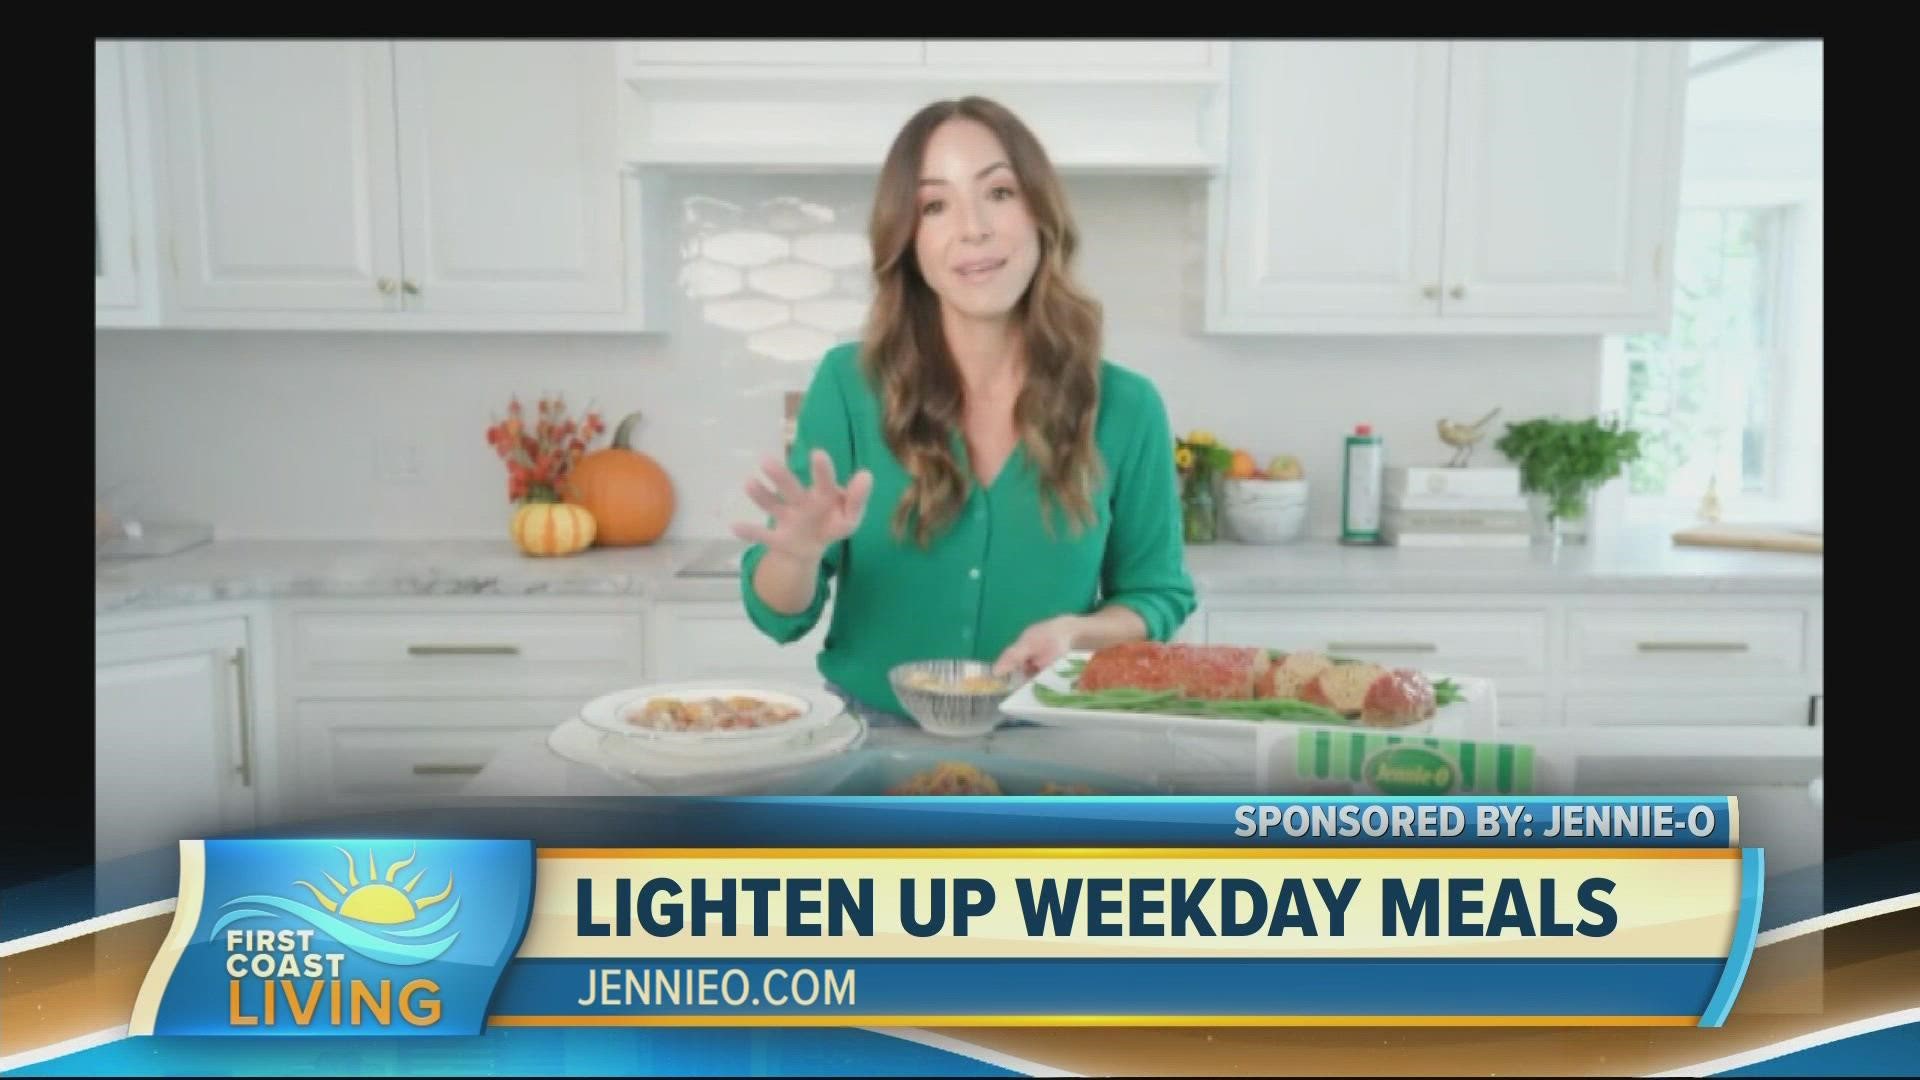 Lifestyle consultant and mom, Ereka Vetrini shares a few Jennie-O dinner recipes that are quick and easy.